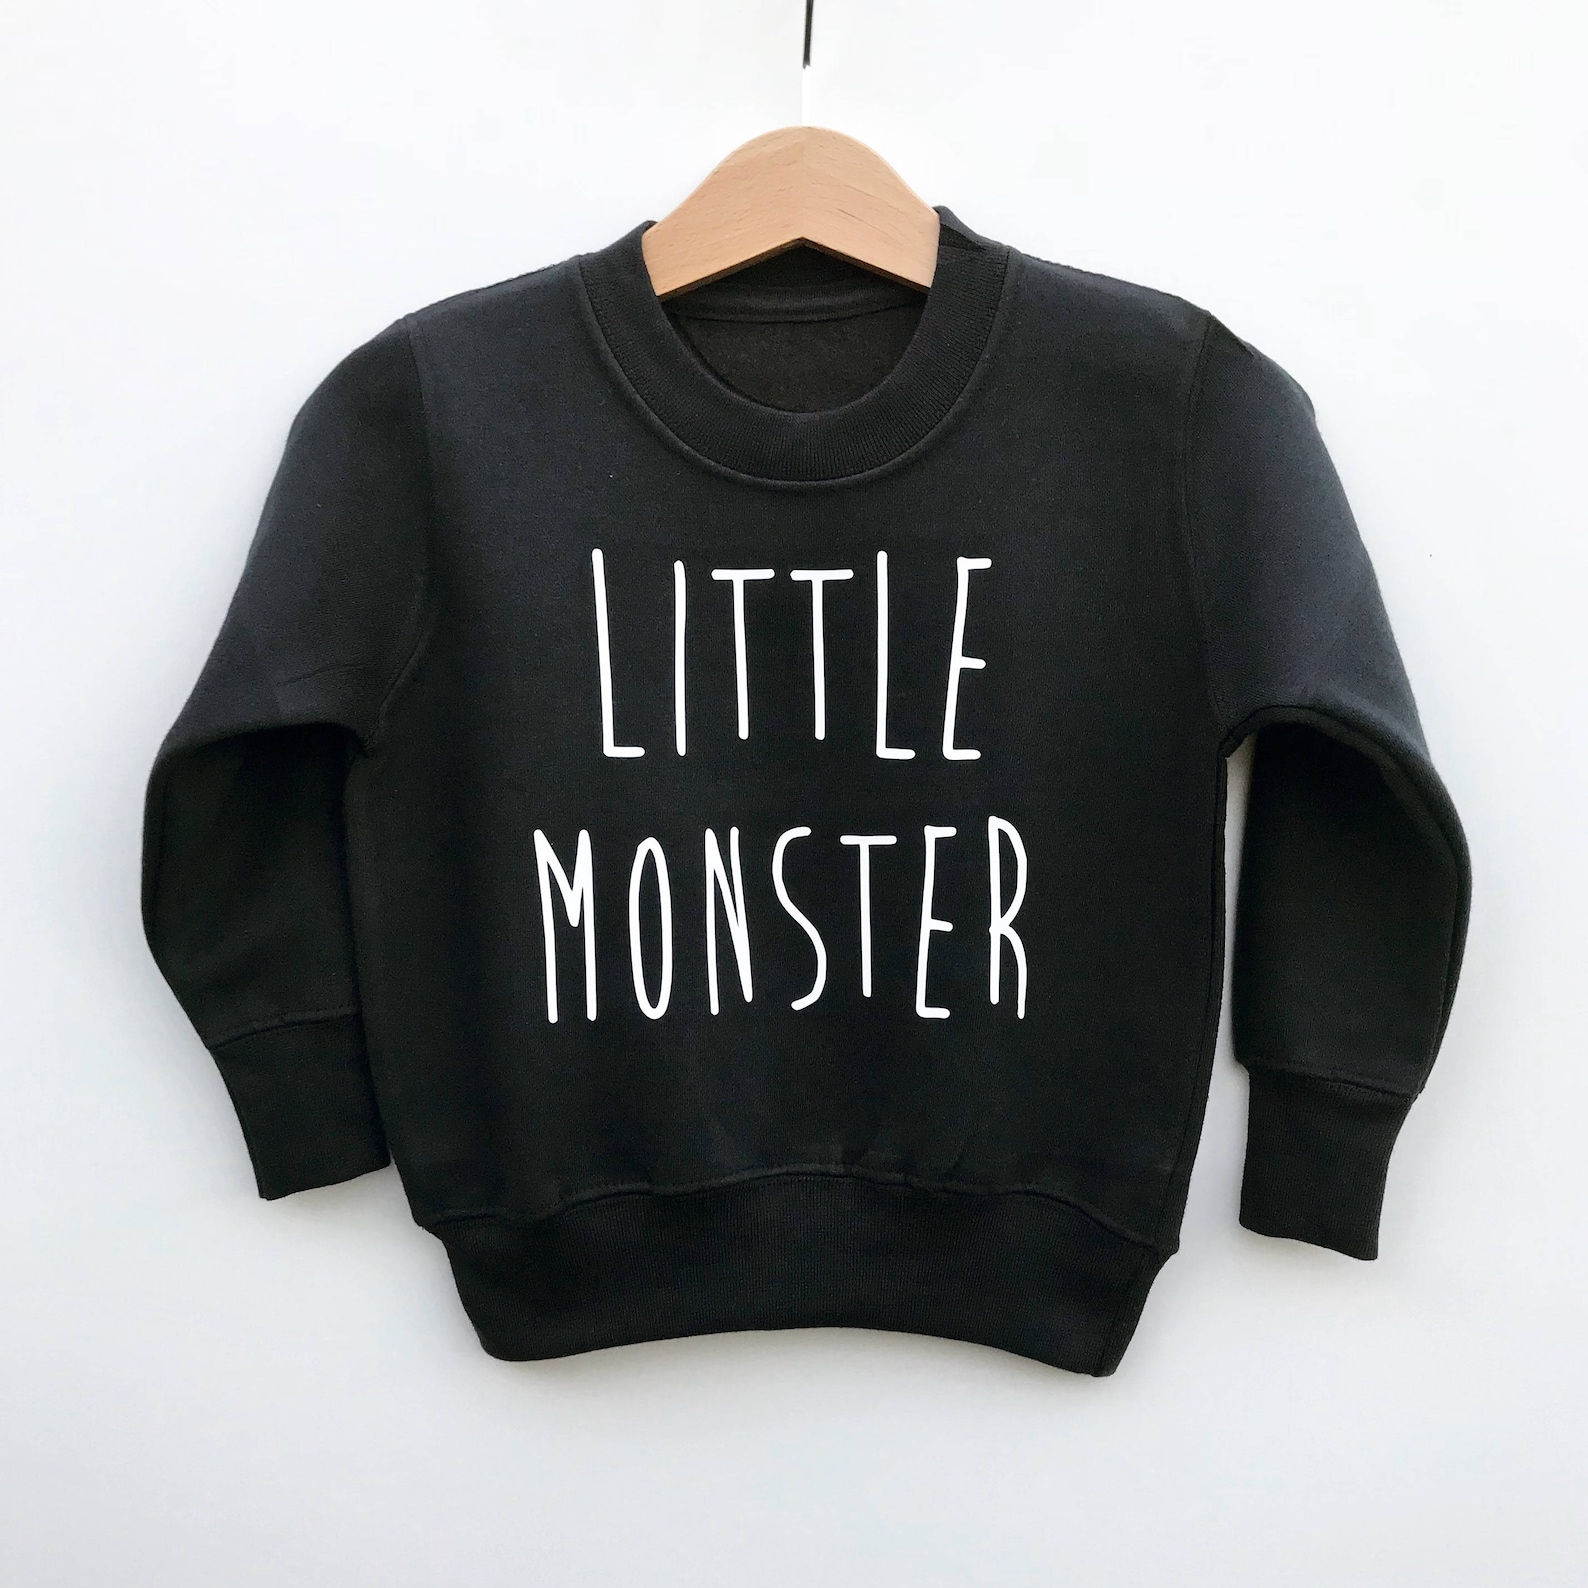 Better up Baby Monster одежда. Baby Monster Butter up фото одежды.